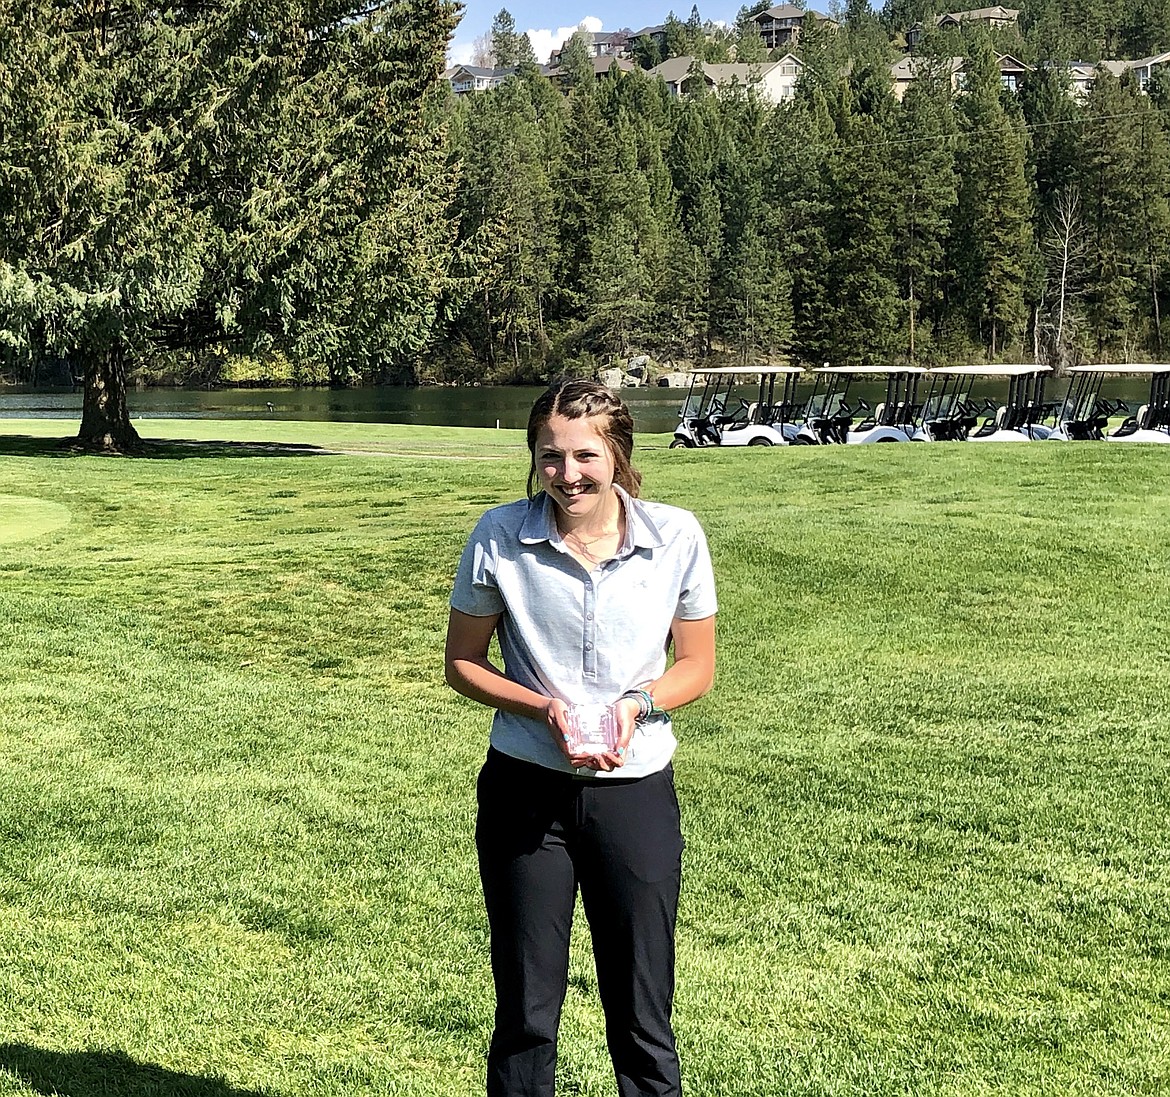 Courtesy photo
Lake City's Kyla Currie finished fifth overall in the Eileen Northcutt Tournament on Friday at Wandermere Golf Course in Spokane.